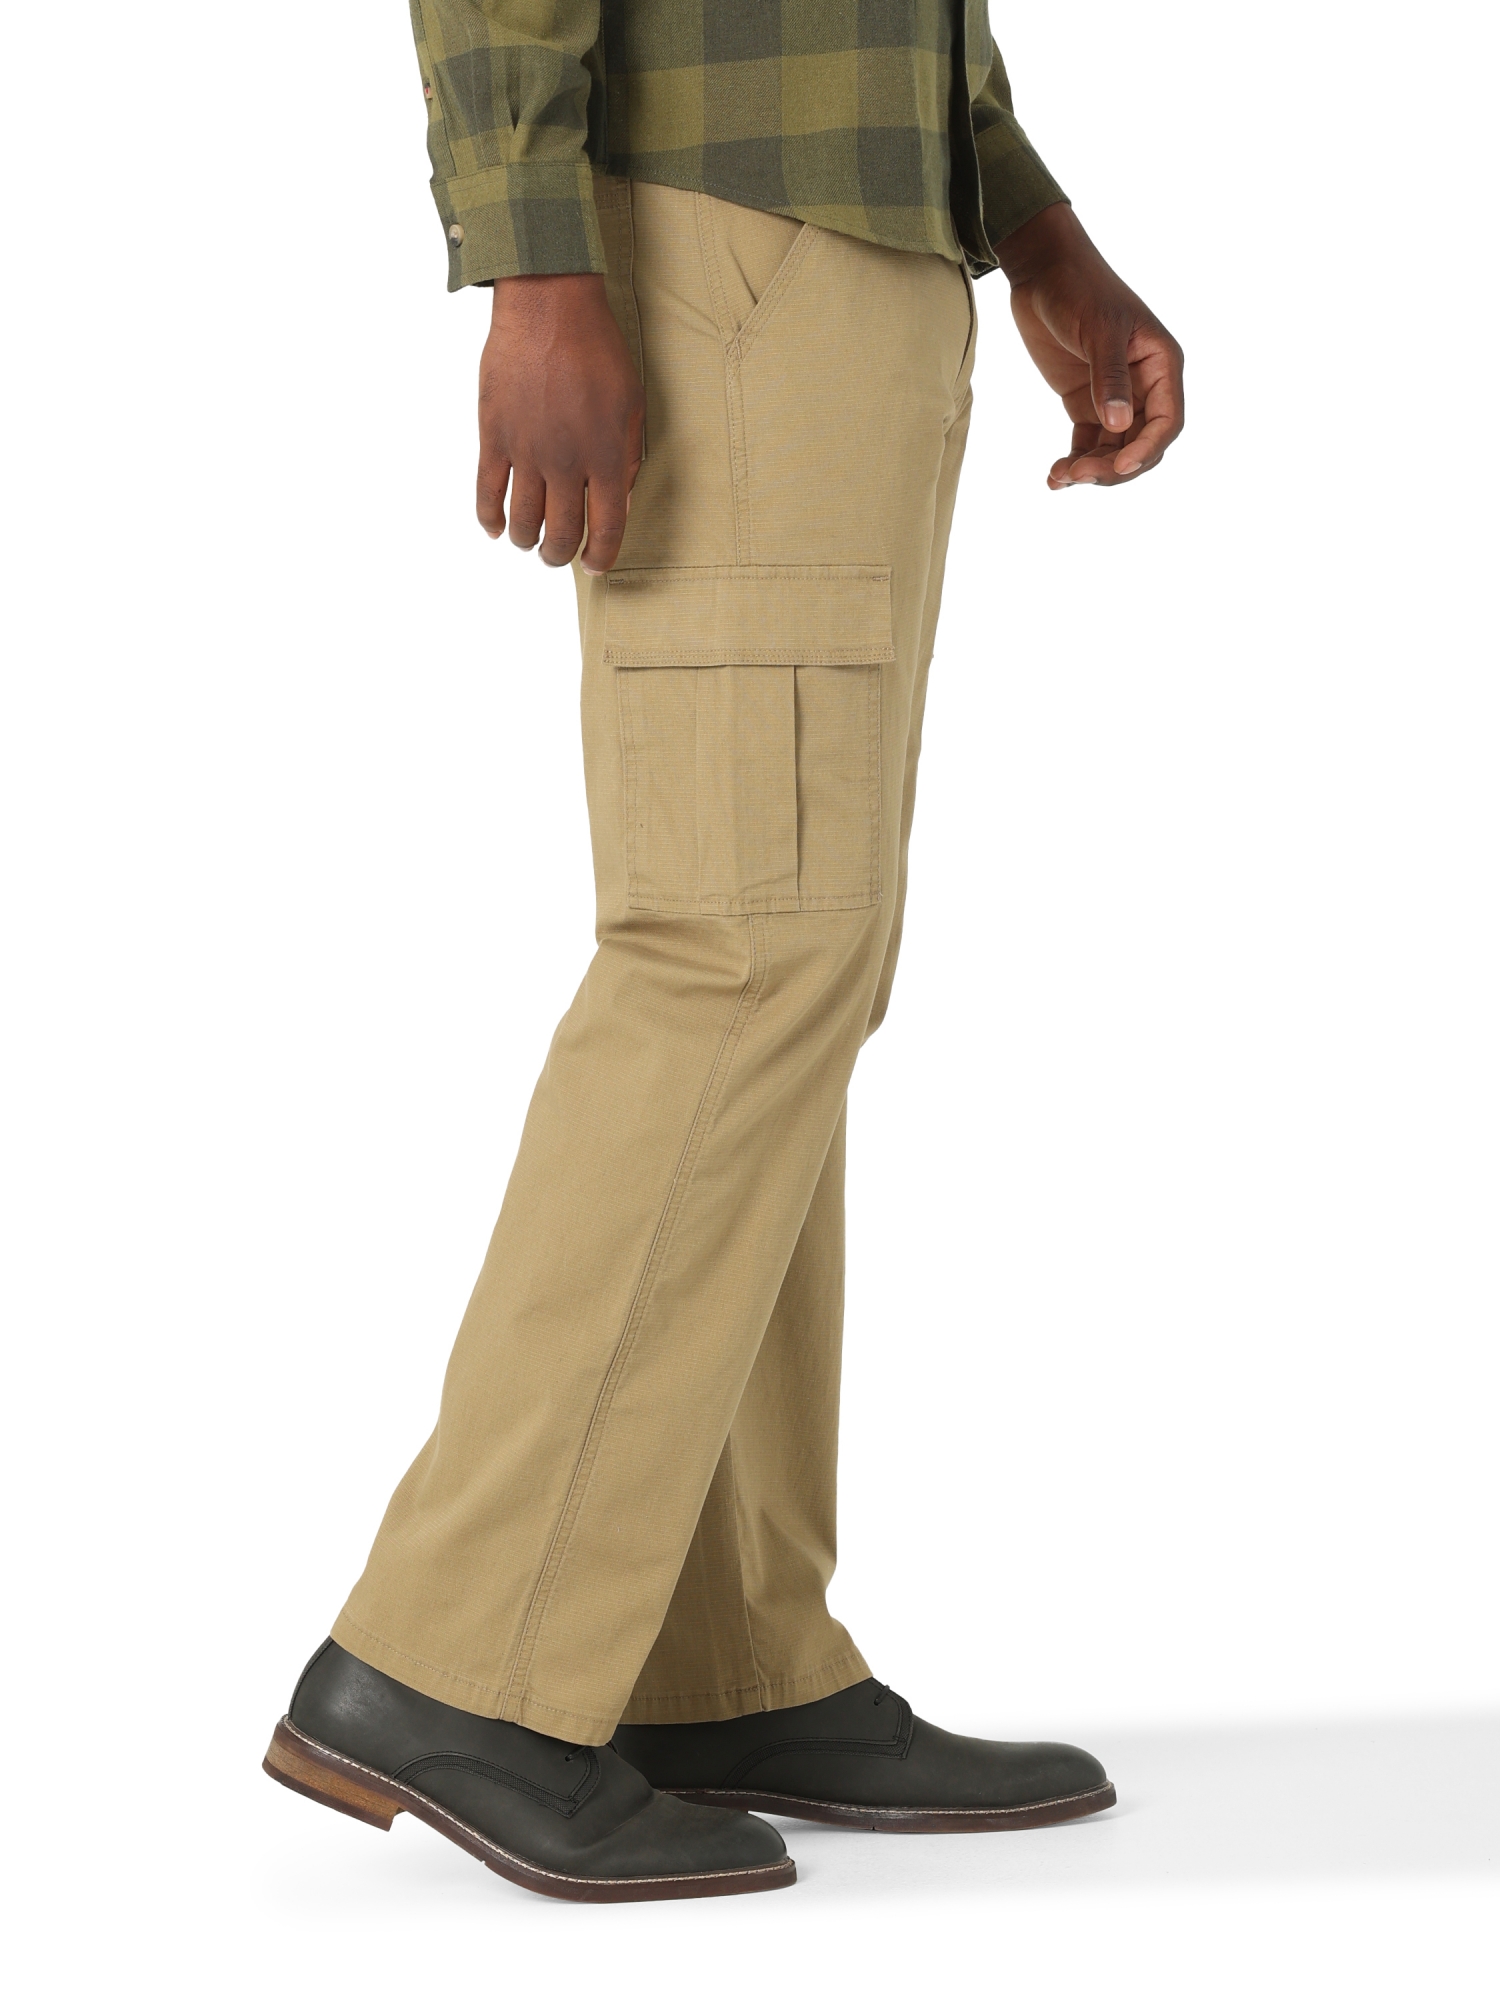 Wrangler Men's and Big Men's Relaxed Fit Legacy Cargo Pant - image 5 of 9